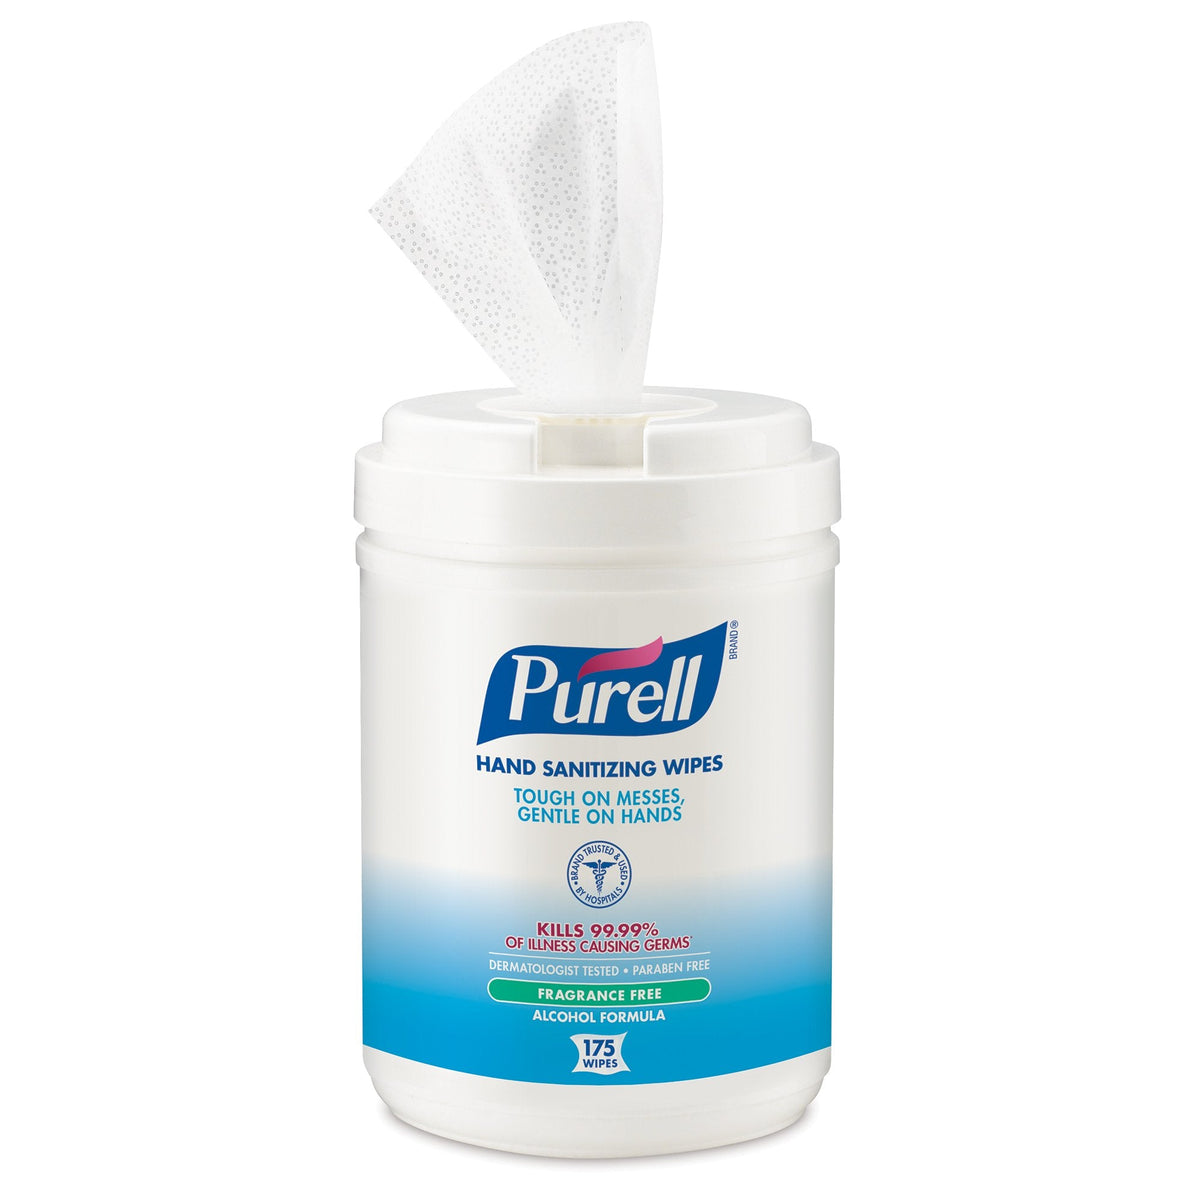 GOJO Purell Hand Sanitizing Wipes, Ethyl Alcohol Wipe Canister - American Hospital Supply